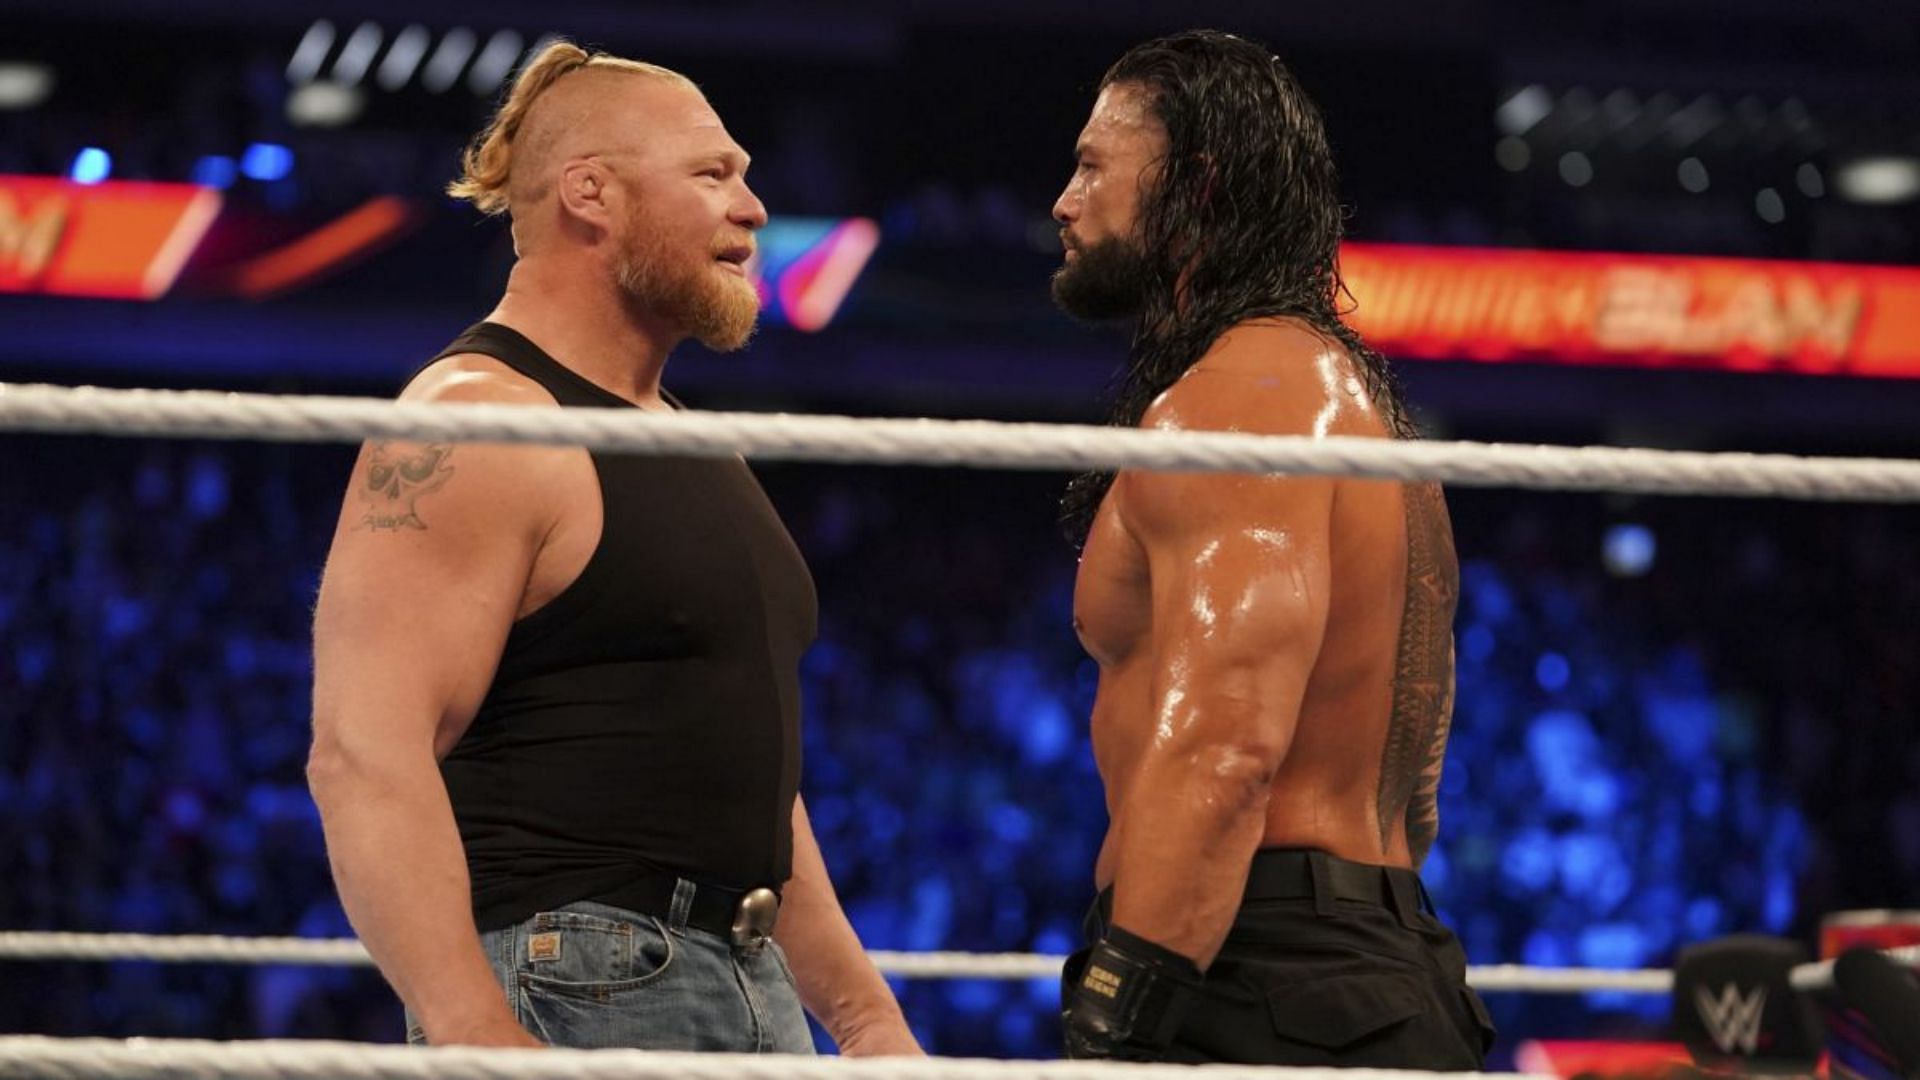 Roman Reigns and Brock Lesnar set to do battle at SummerSlam have a threat looming over their shoulders in Mr. Money In The Bank.